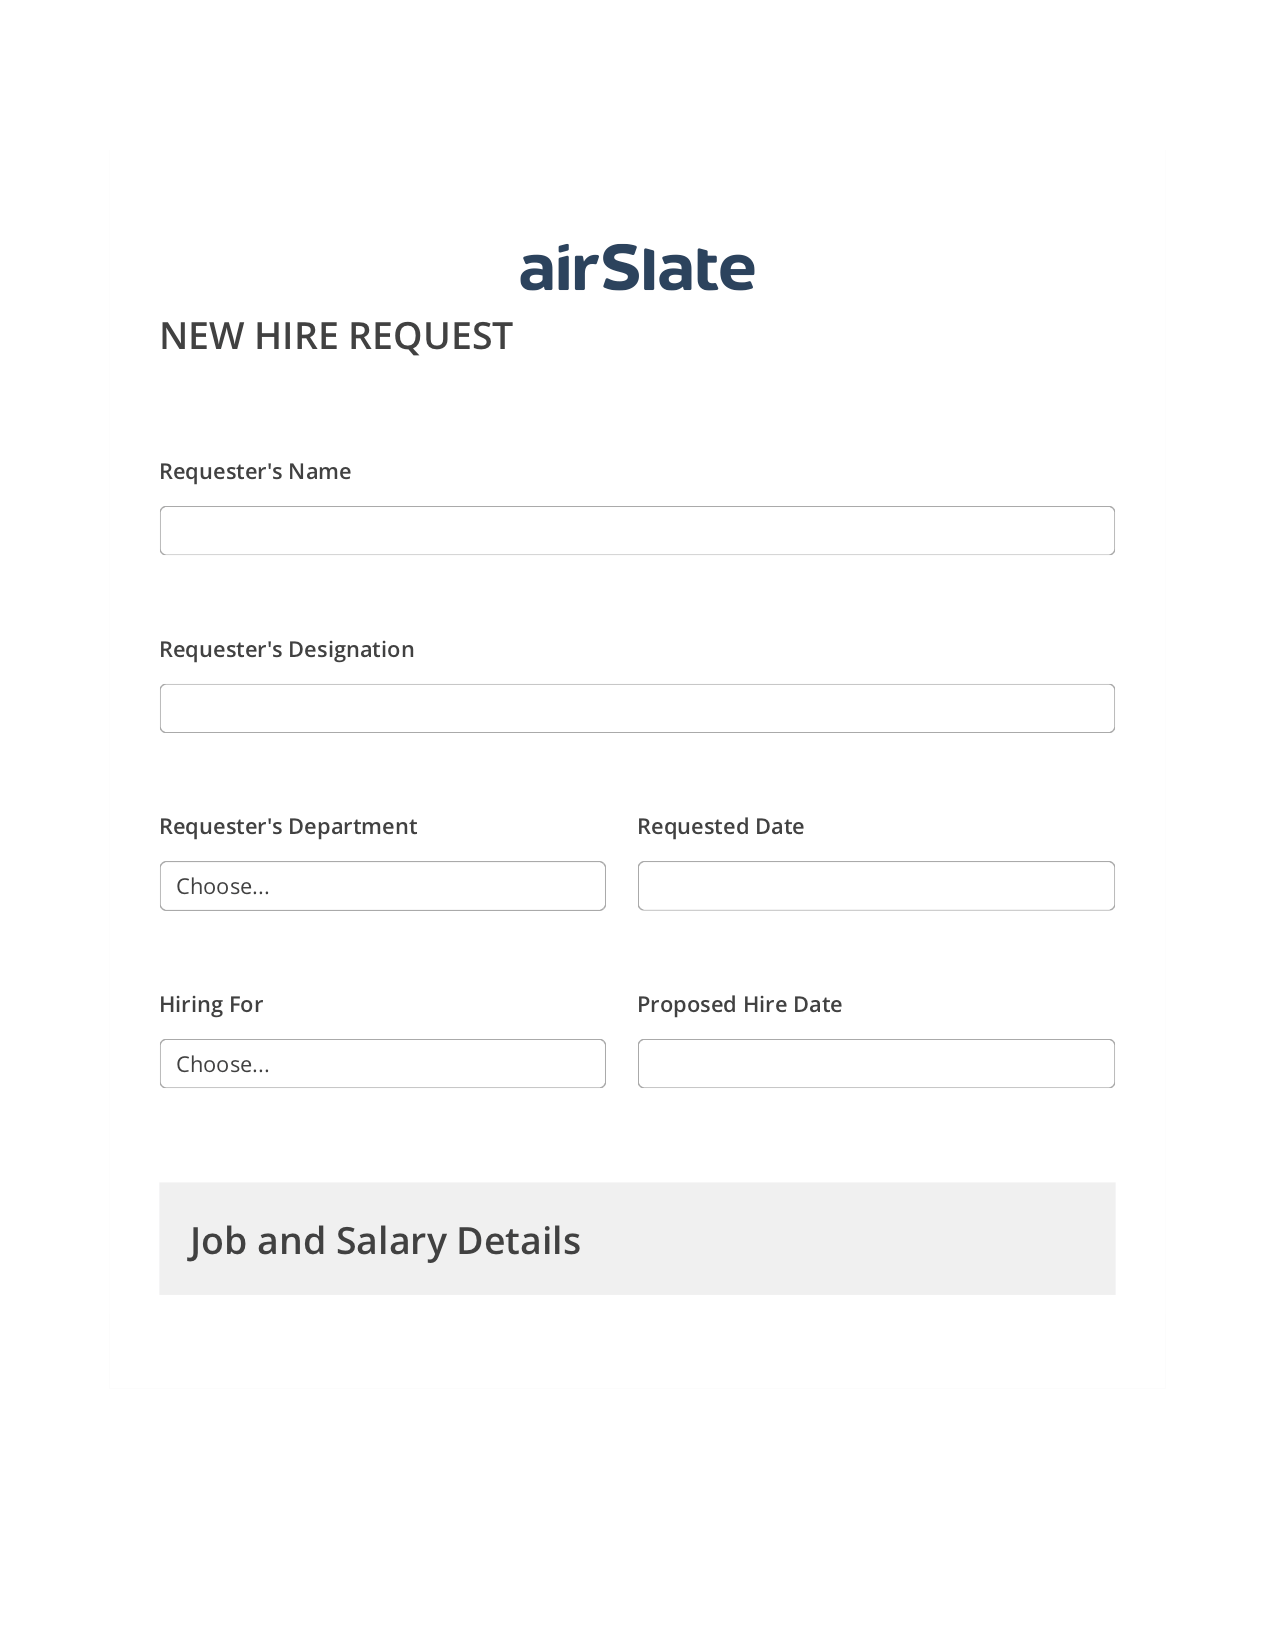 Hiring Request Workflow Pre-fill Document Bot, Send a Slate with Roles Bot, Export to WebMerge Bot